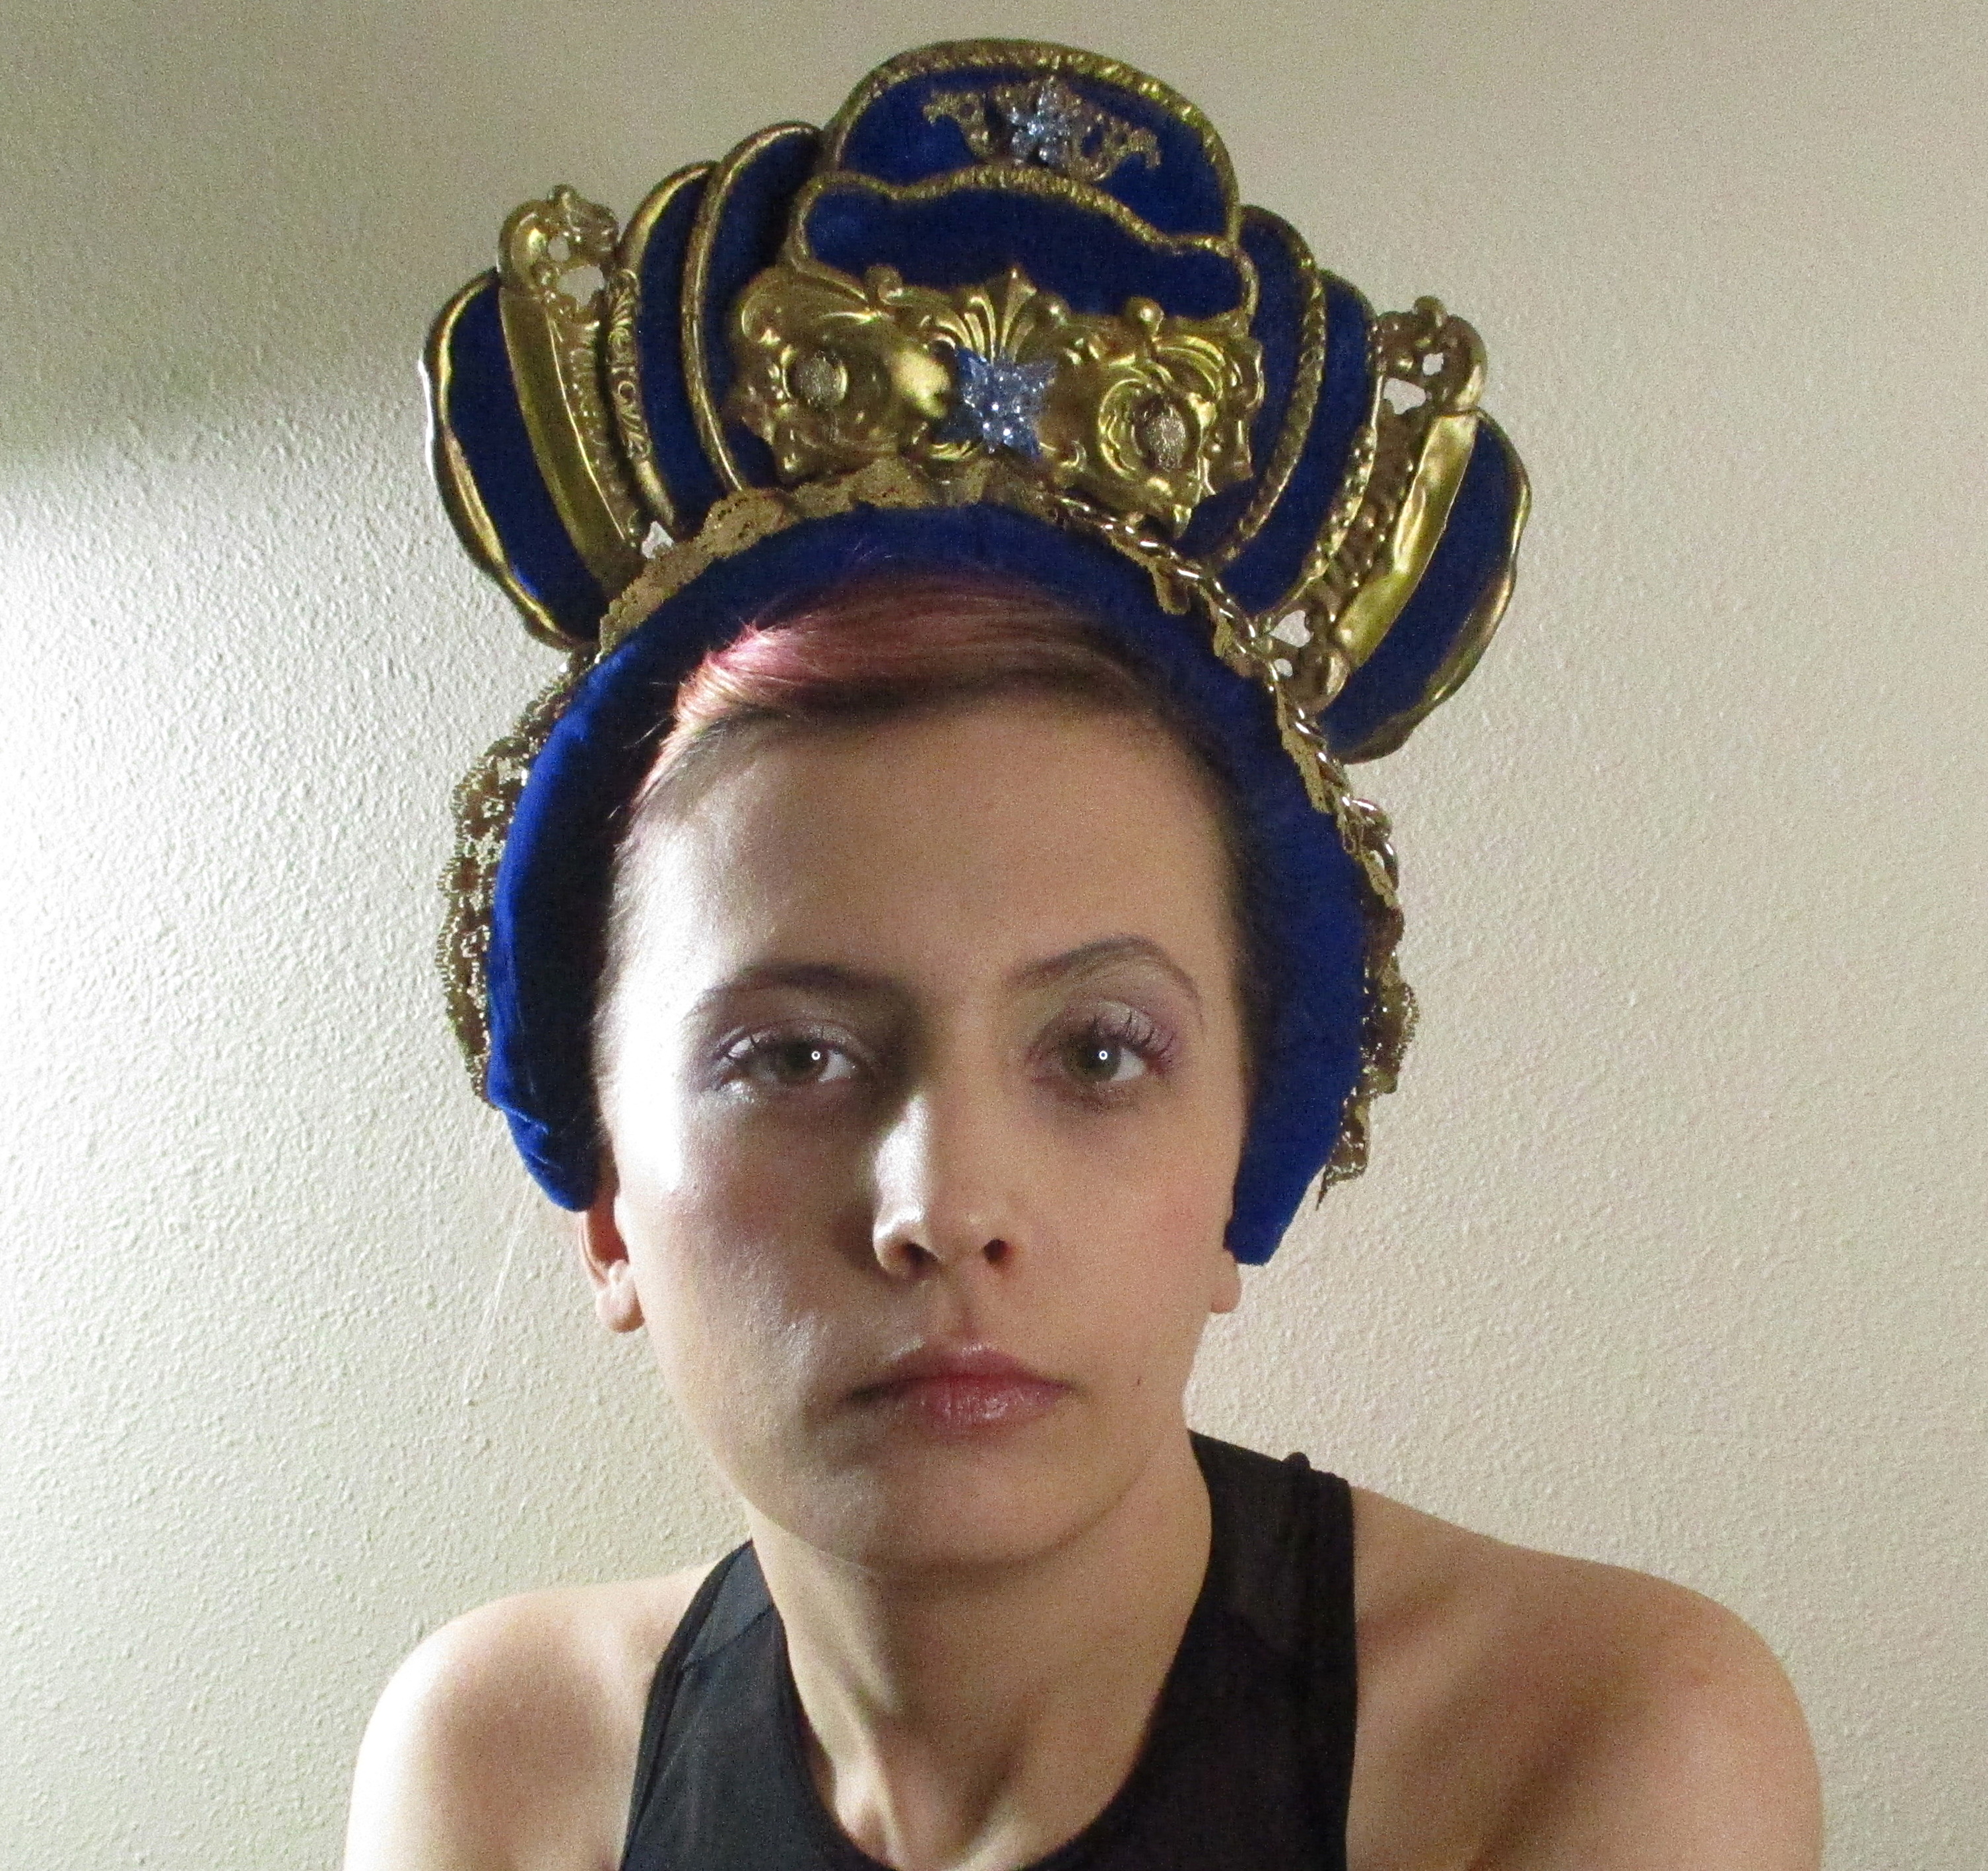 Blue Velvet Vintage Couture Upcycled Crown by Marelle Couture. HopscotchCouture.com #crown #handmade #bluevelvet #royalcrown